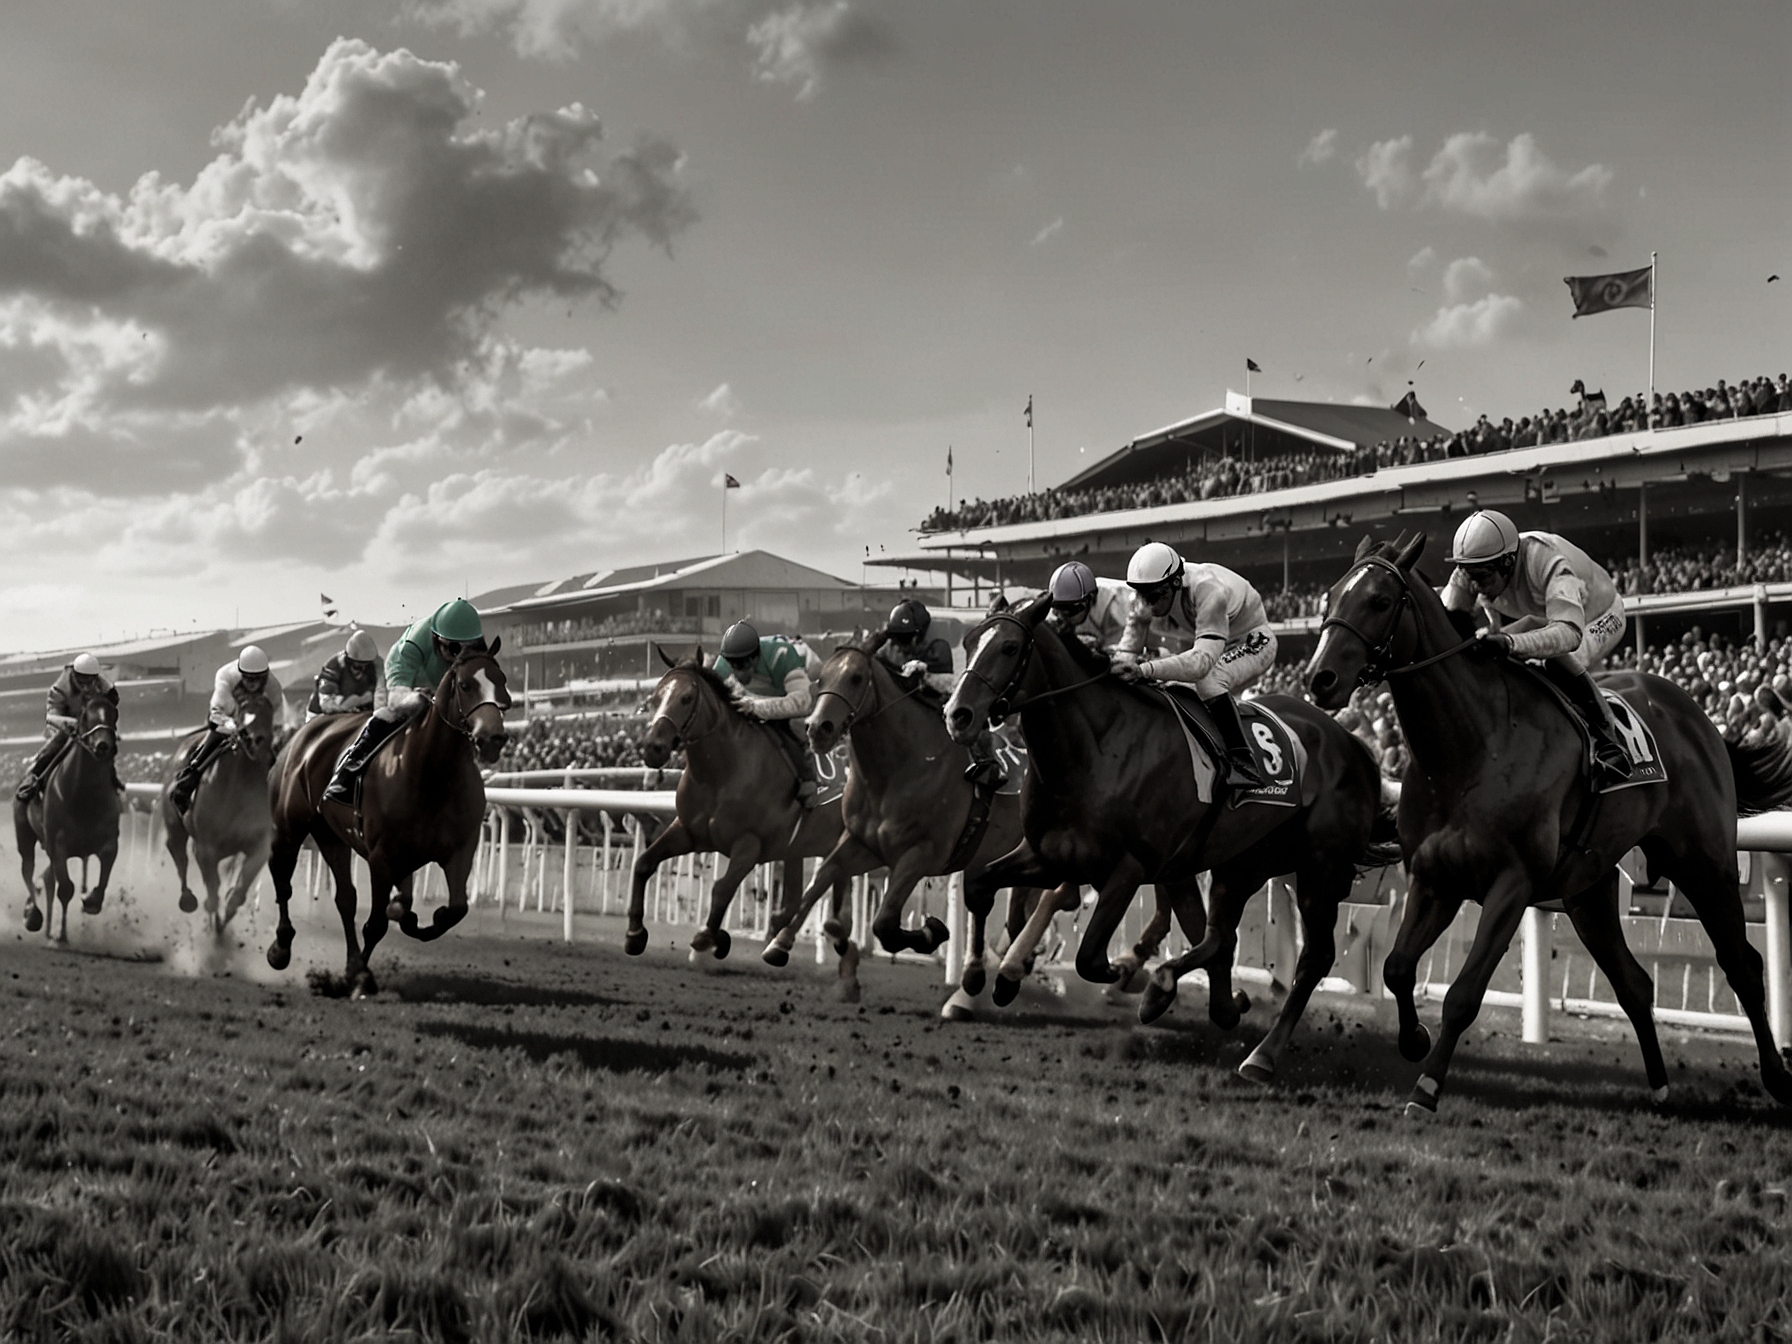 Illustration of a horse race under ideal weather conditions, highlighting Templegate's NAP leading the pack, demonstrating its advantage over other competitors.